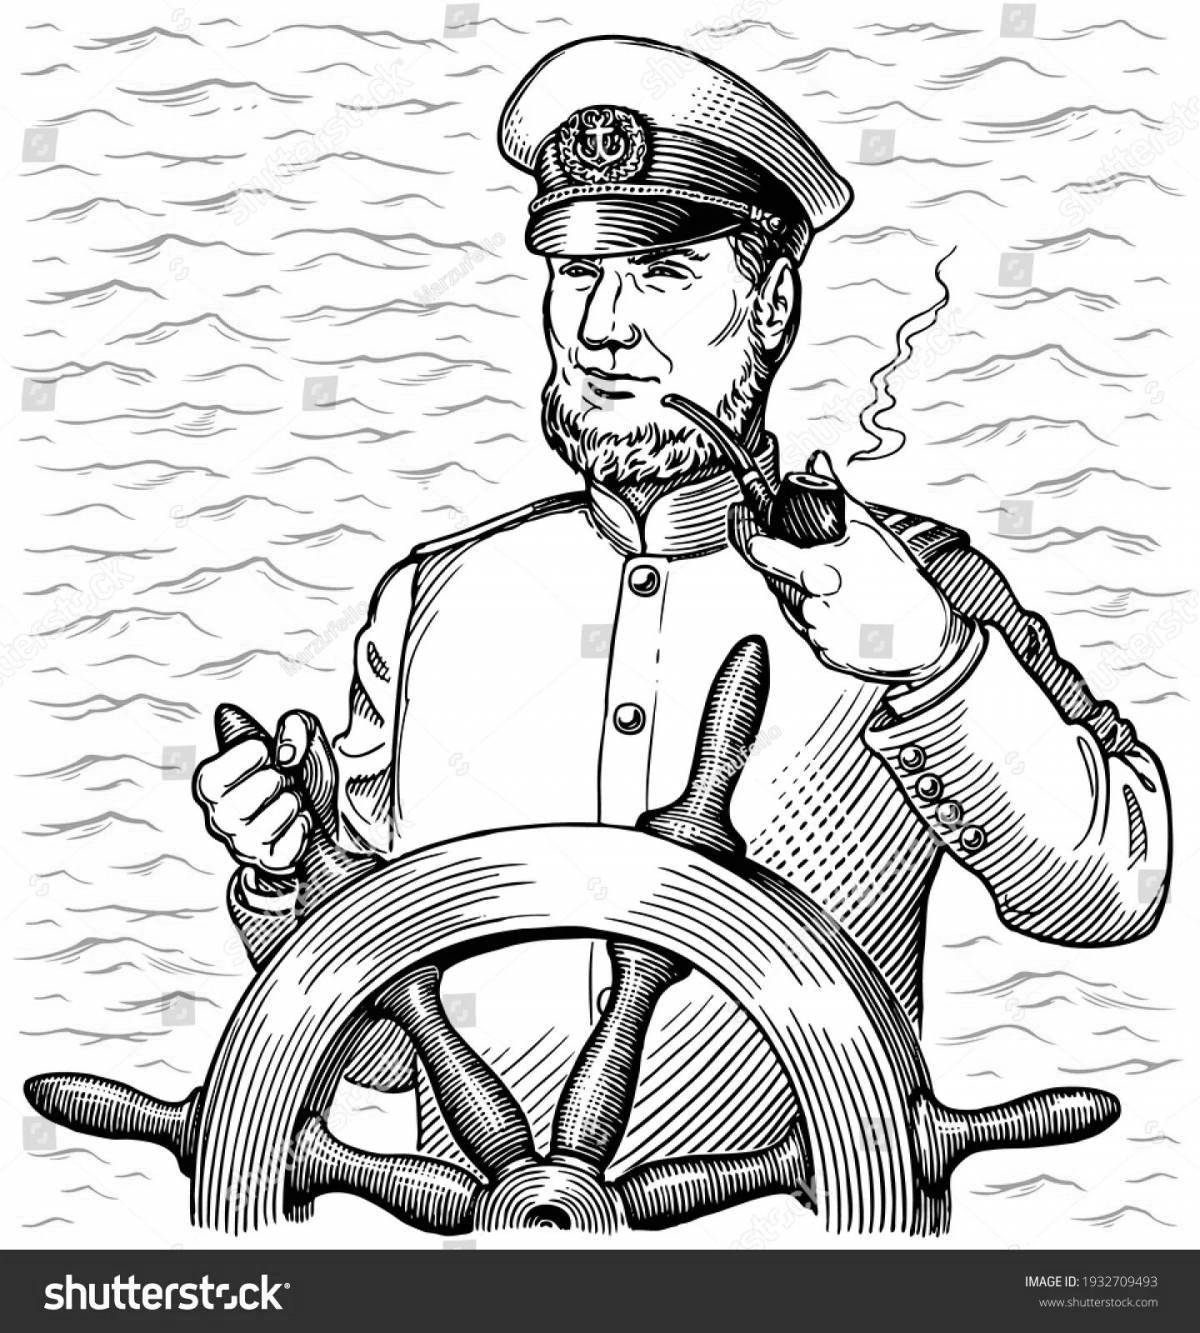 Coloring page dazzling ship captain